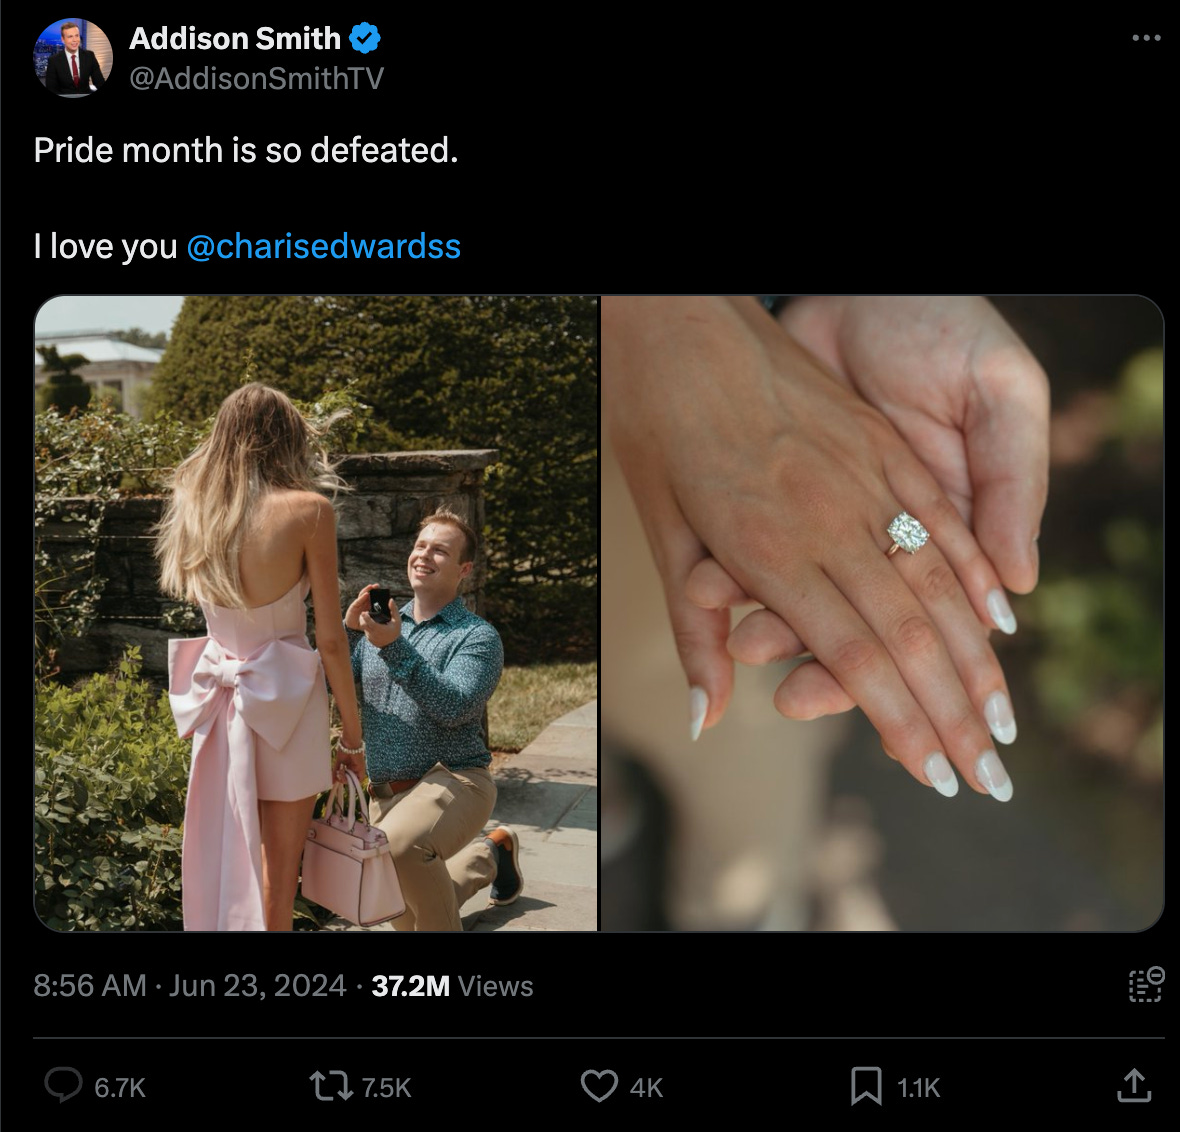 "Pride month is so defeated," tweeted Addison Smith, who says he loves his fiancee, a woman